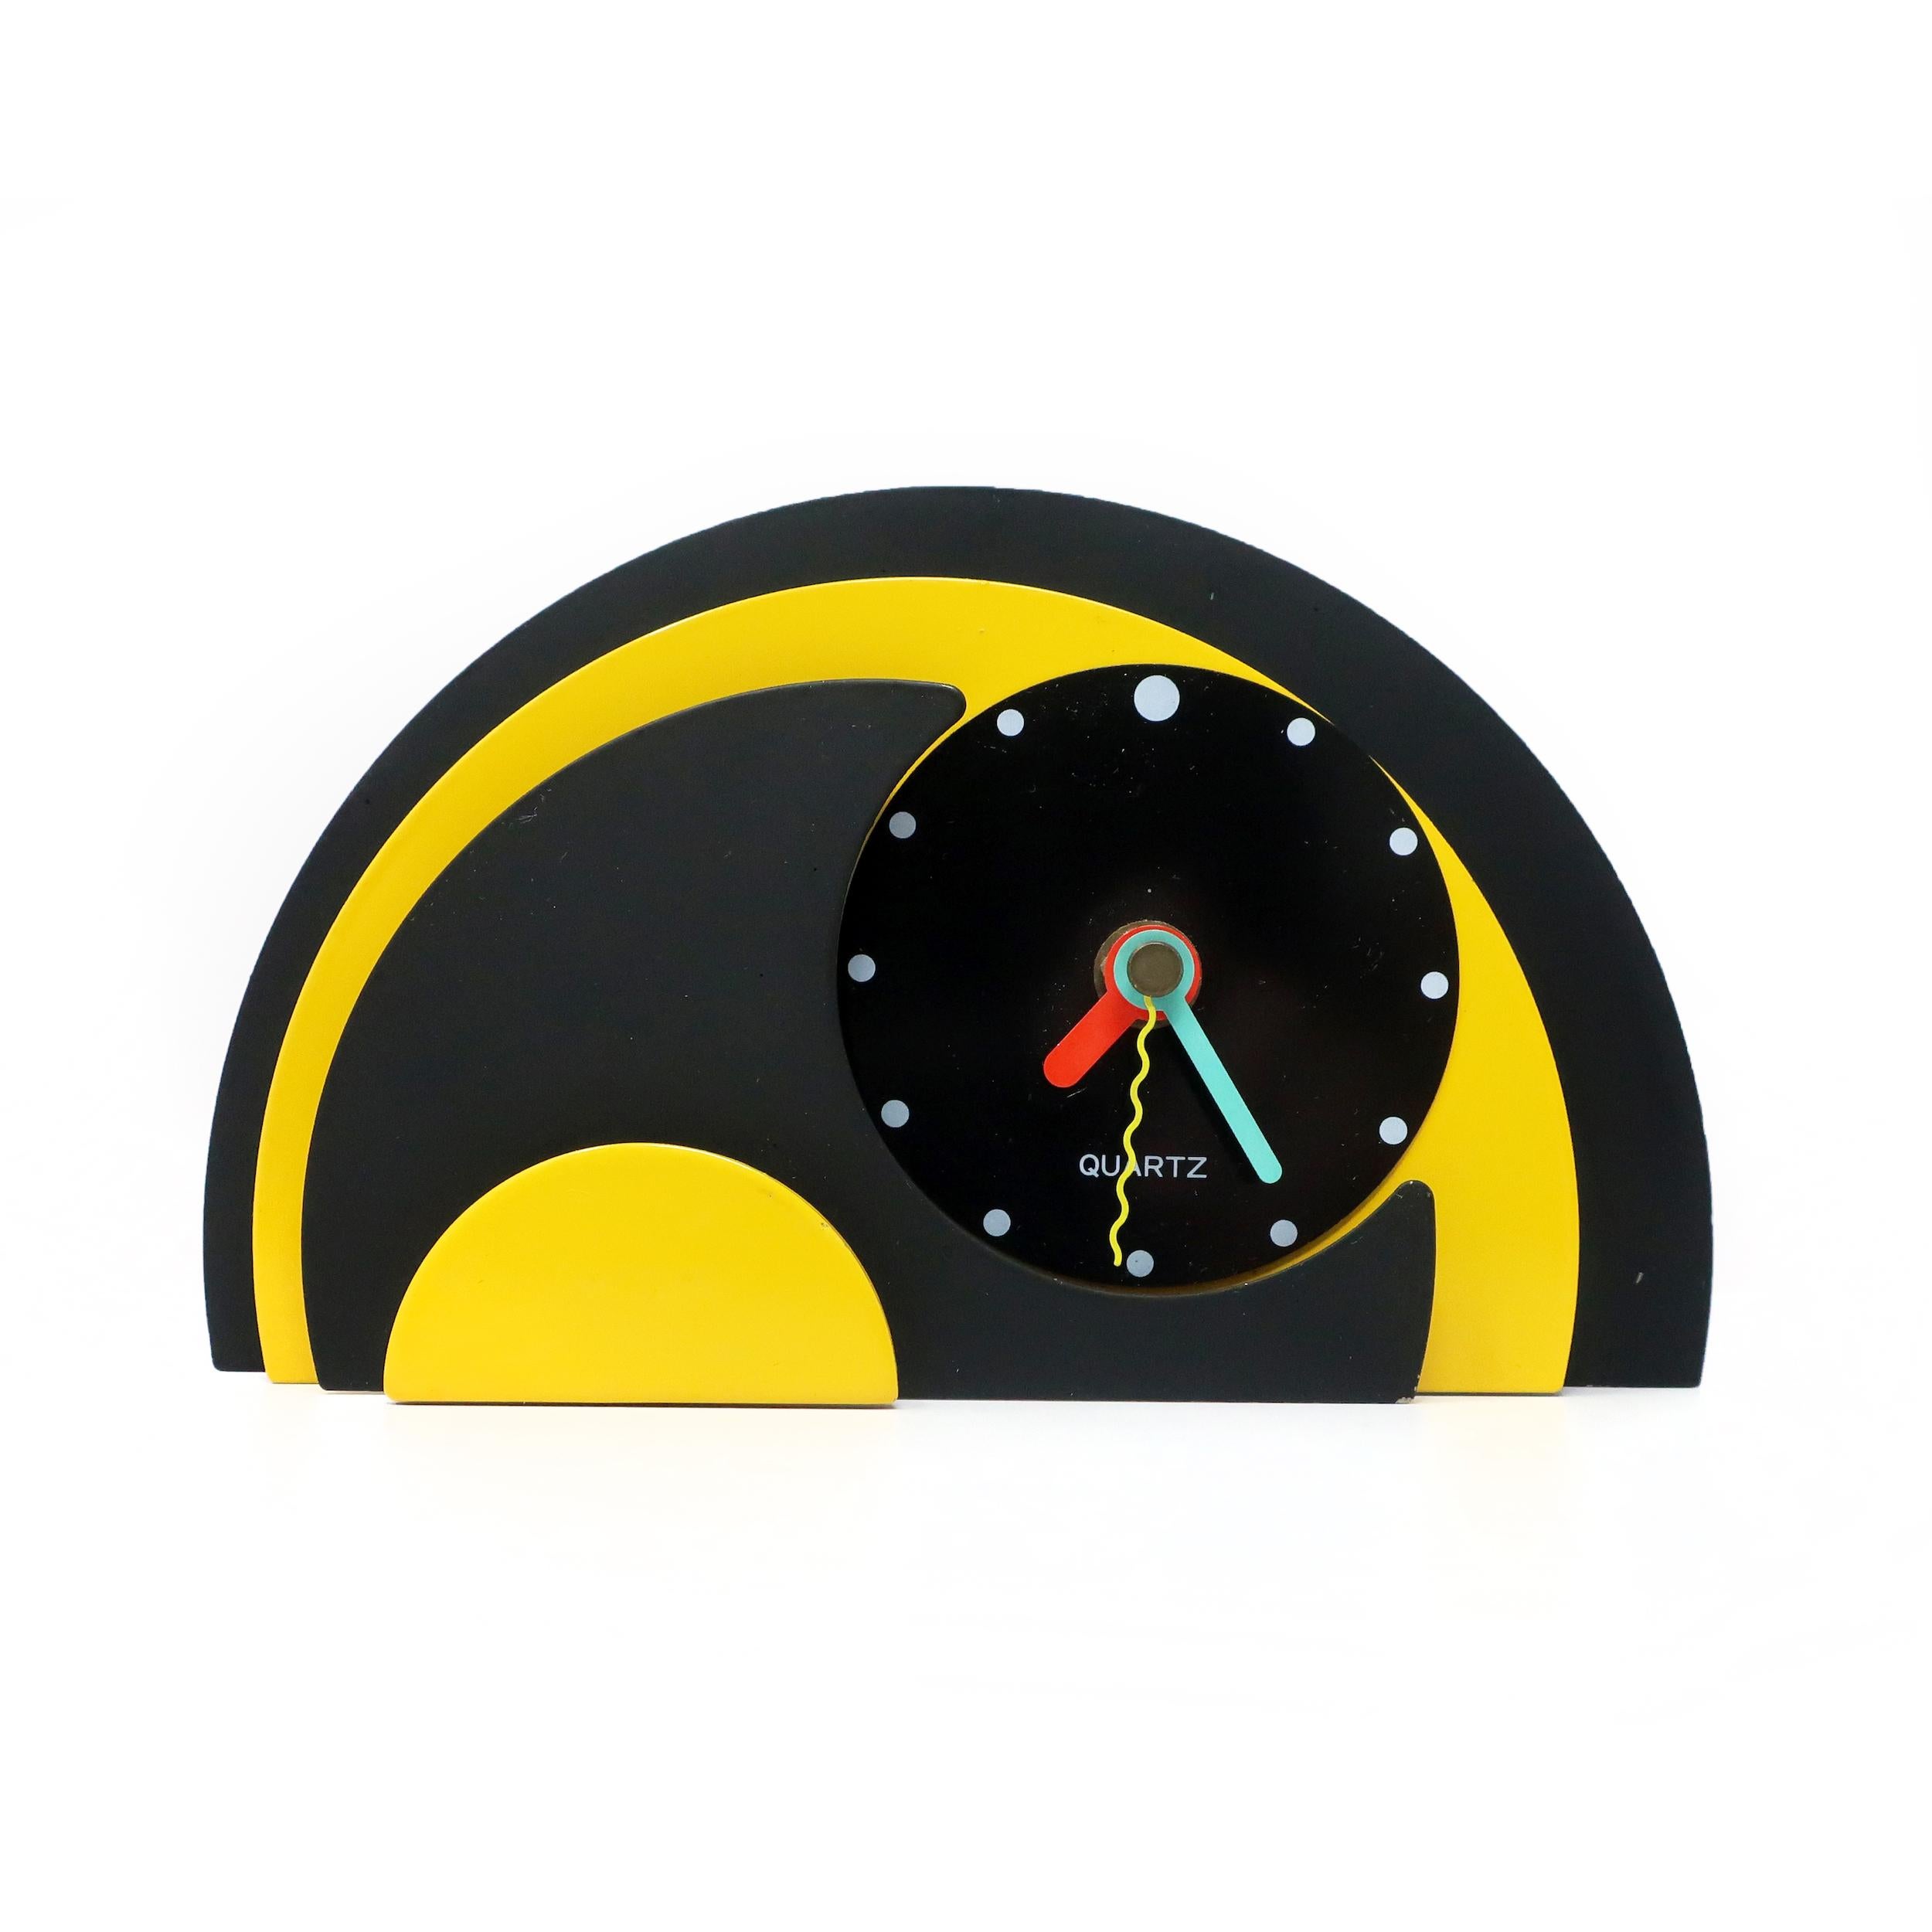 With a stunning combination of yellow, black, and enameled metal, black lucite accents, and primary-colored hands, this postmodern clock is designed with a stacked semi-circle design that gives it a rare and beautiful three-dimensionality. Bold